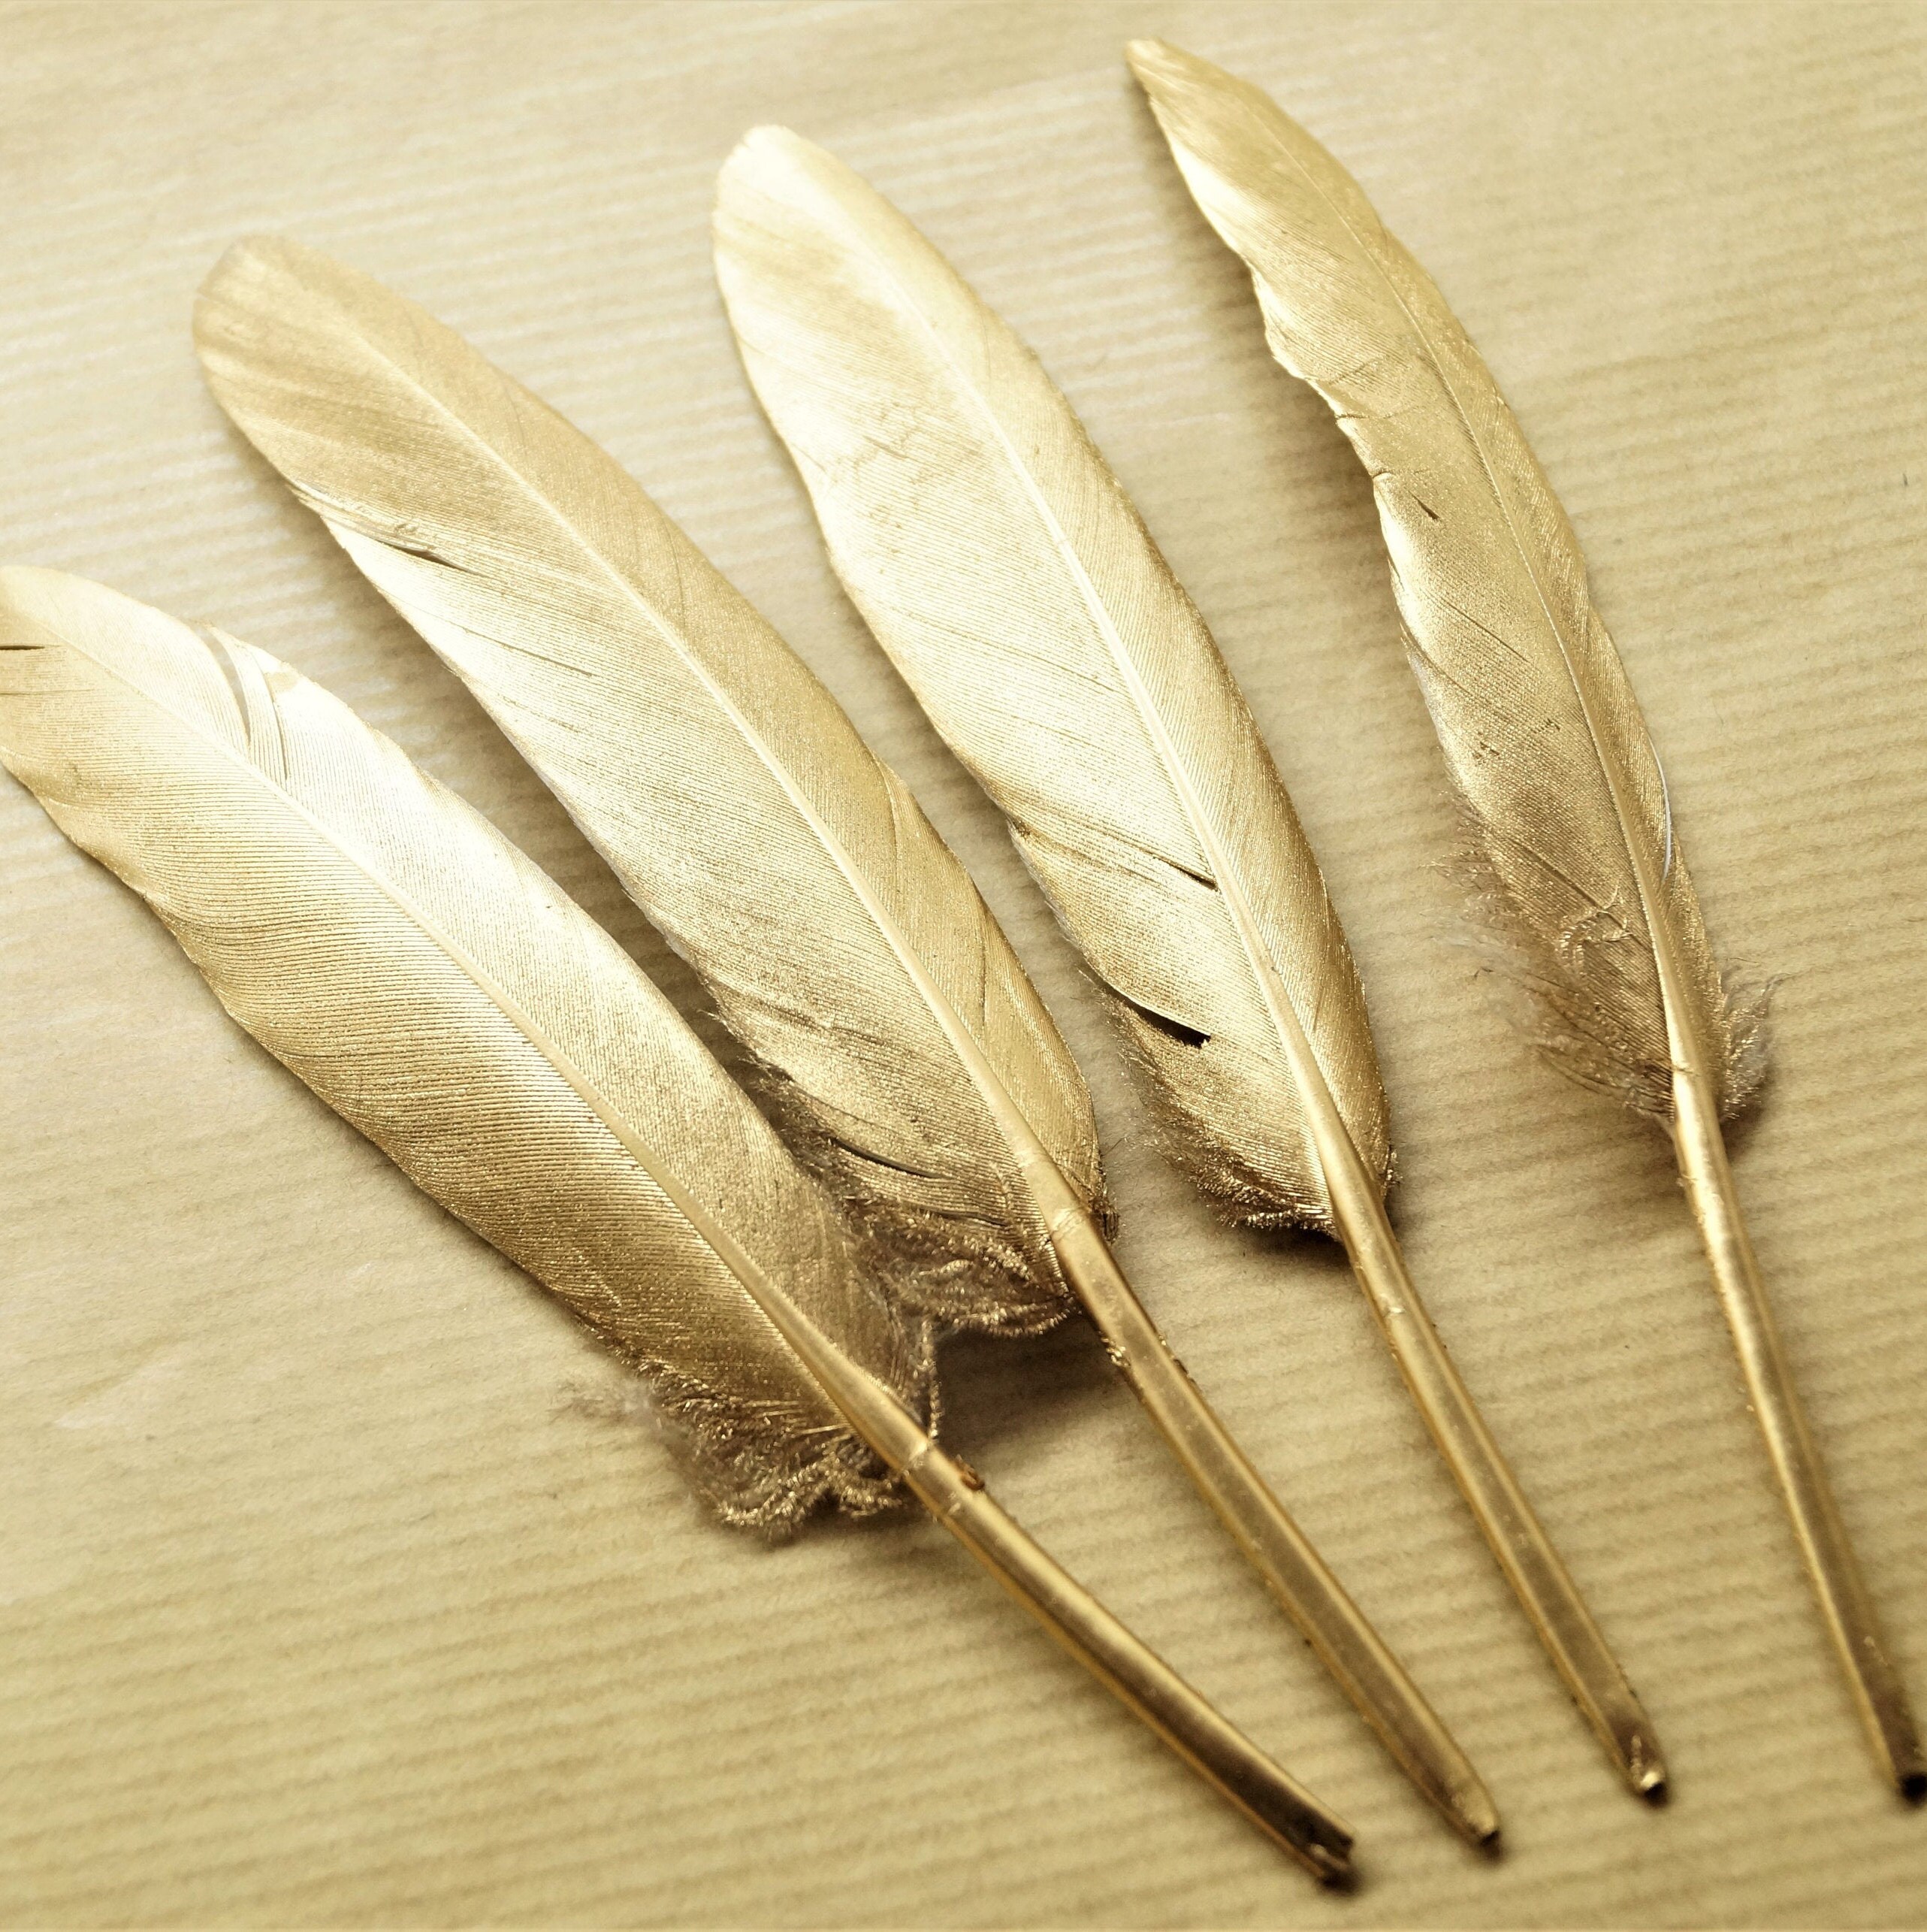 100 Pcs Gold Dipped Feathers gold GOOSE Feathers Loose 5-8inch for